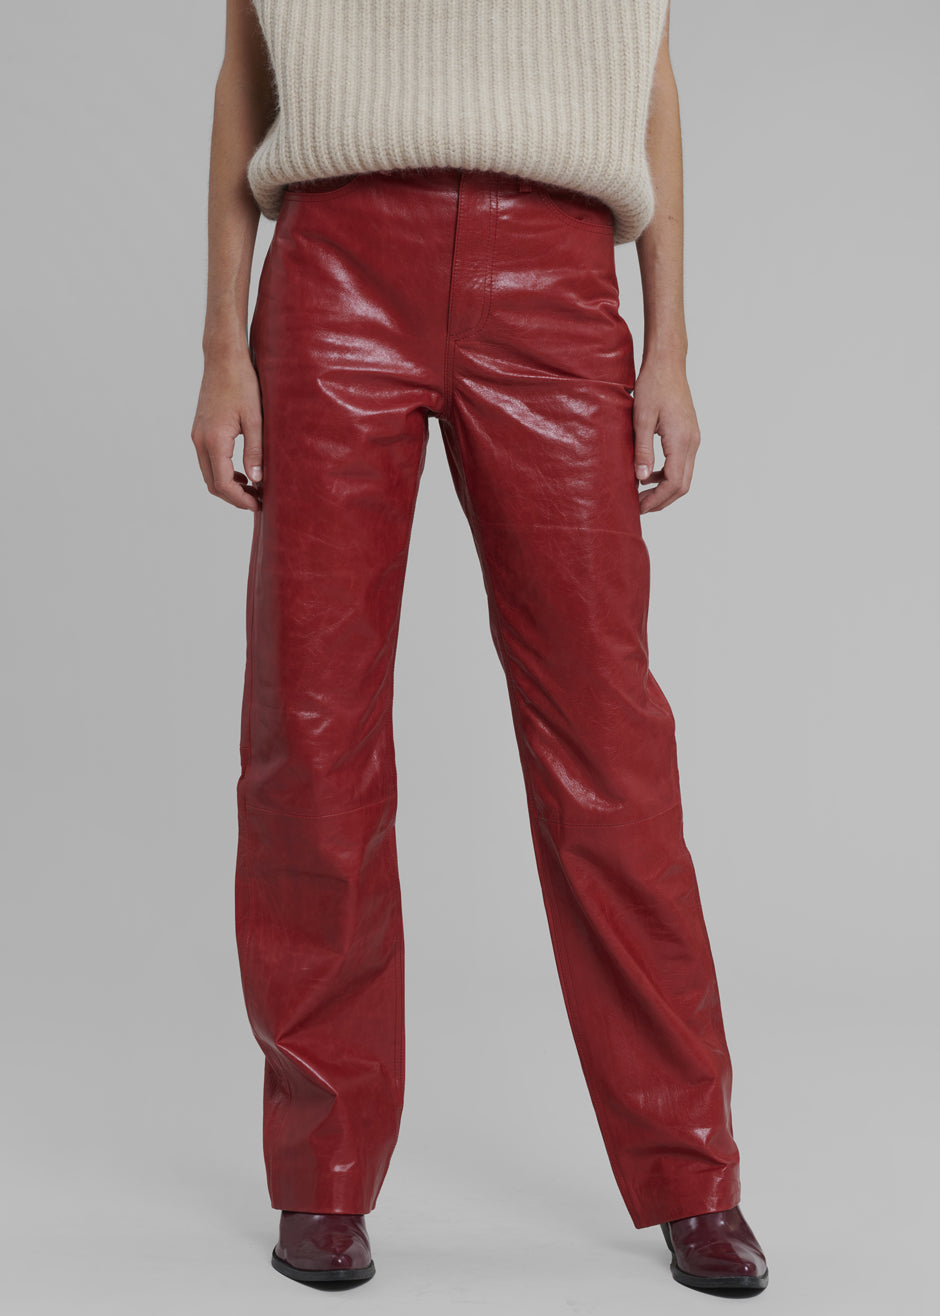 REMAIN Pants Crunchy Leather - Chili Pepper - 1